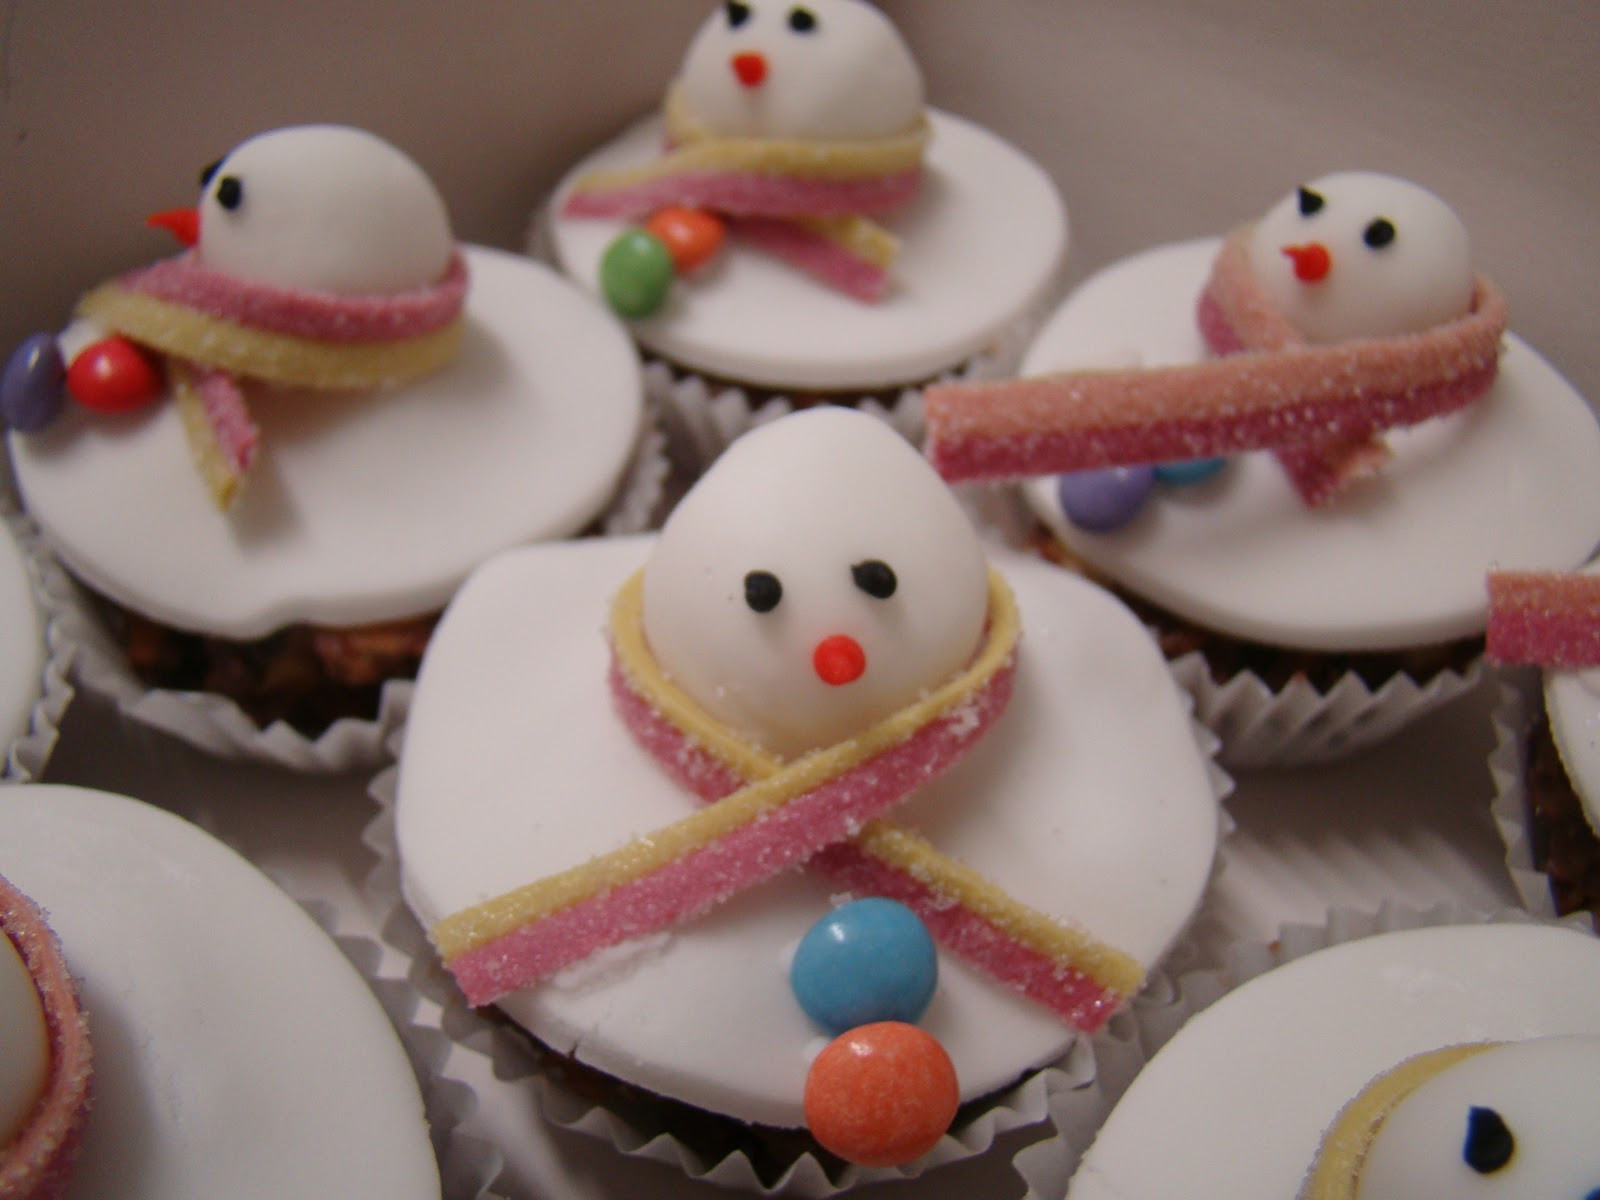 Christmas Cakes For Sale
 1000 images about Christmas Bake Sale Ideas on Pinterest